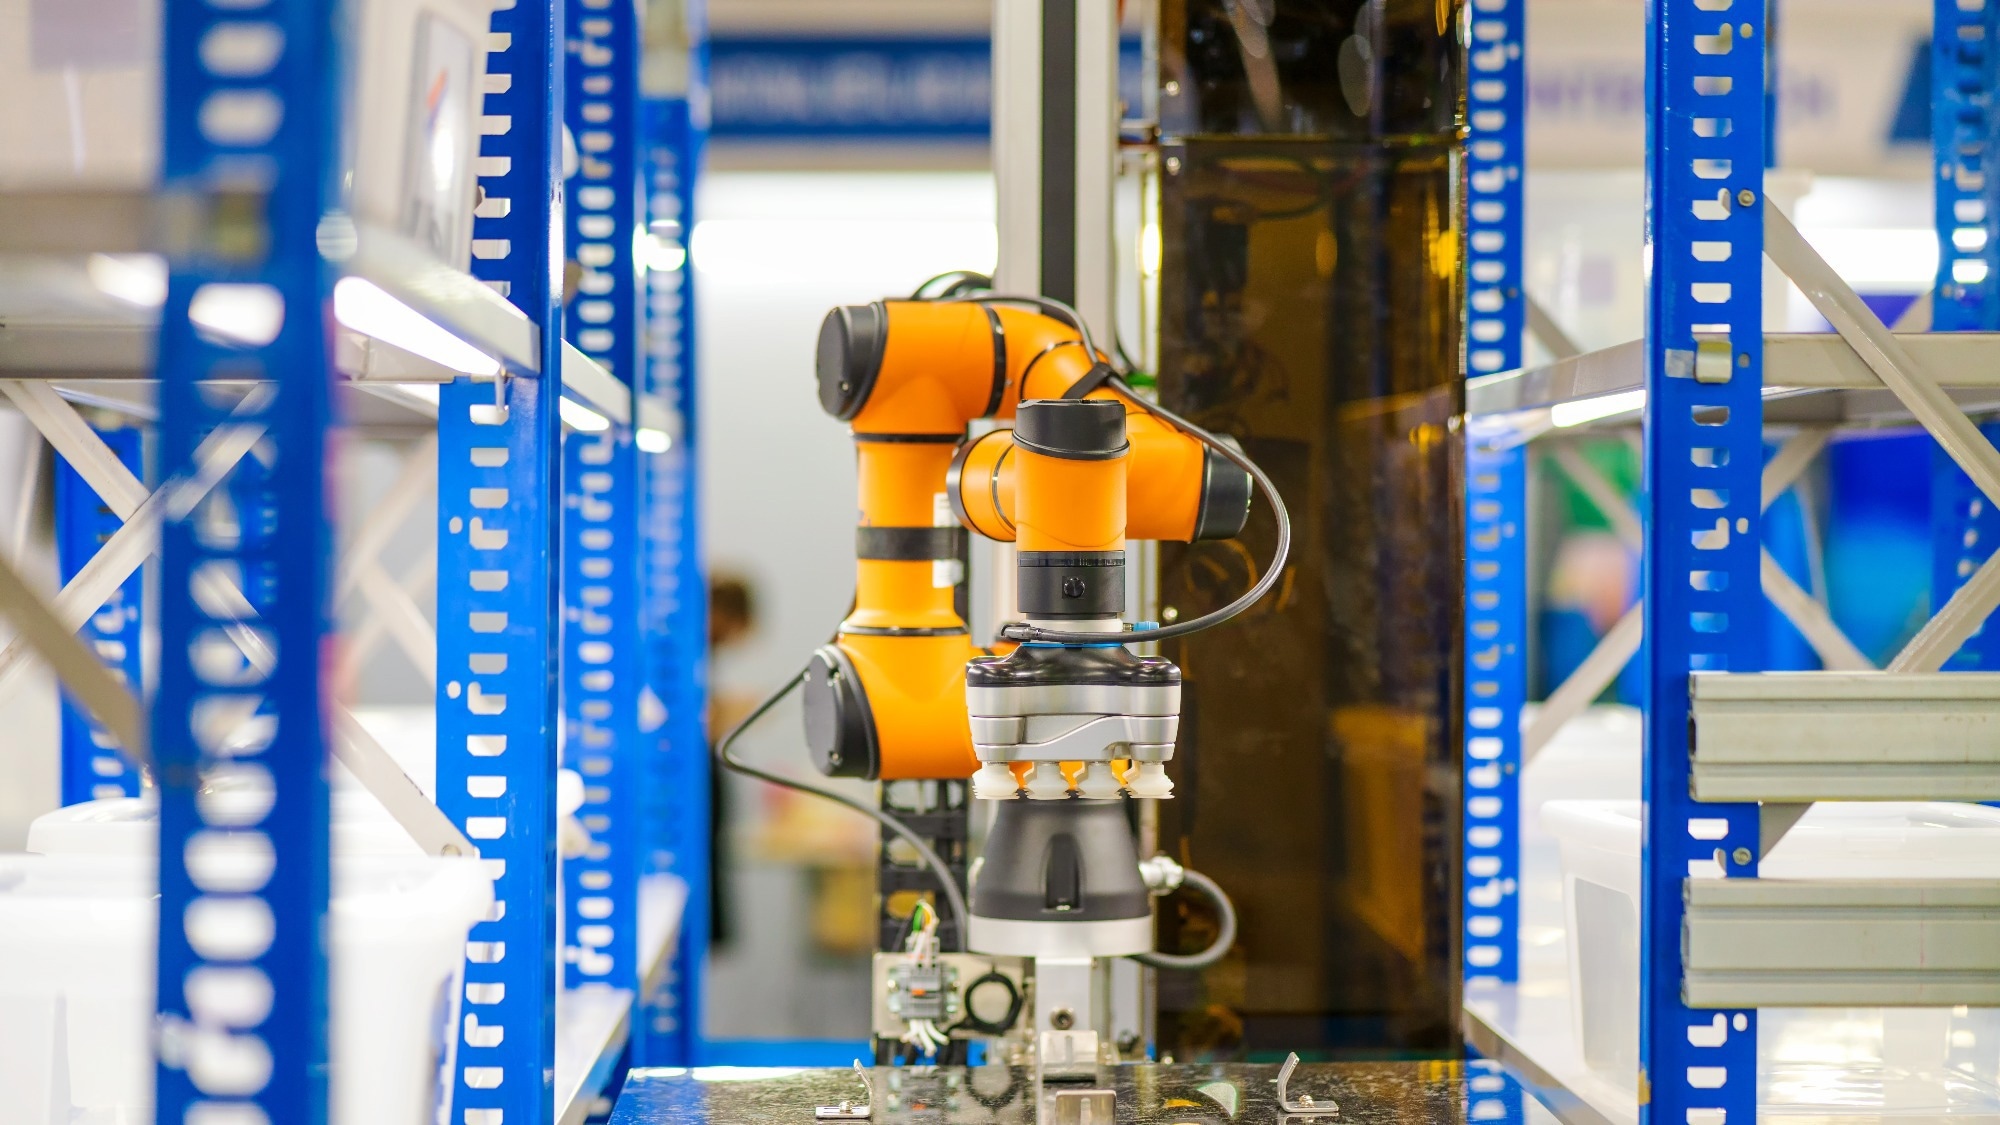 Cobots in Manufacturing: A New Era of Human-Robot Collaboration